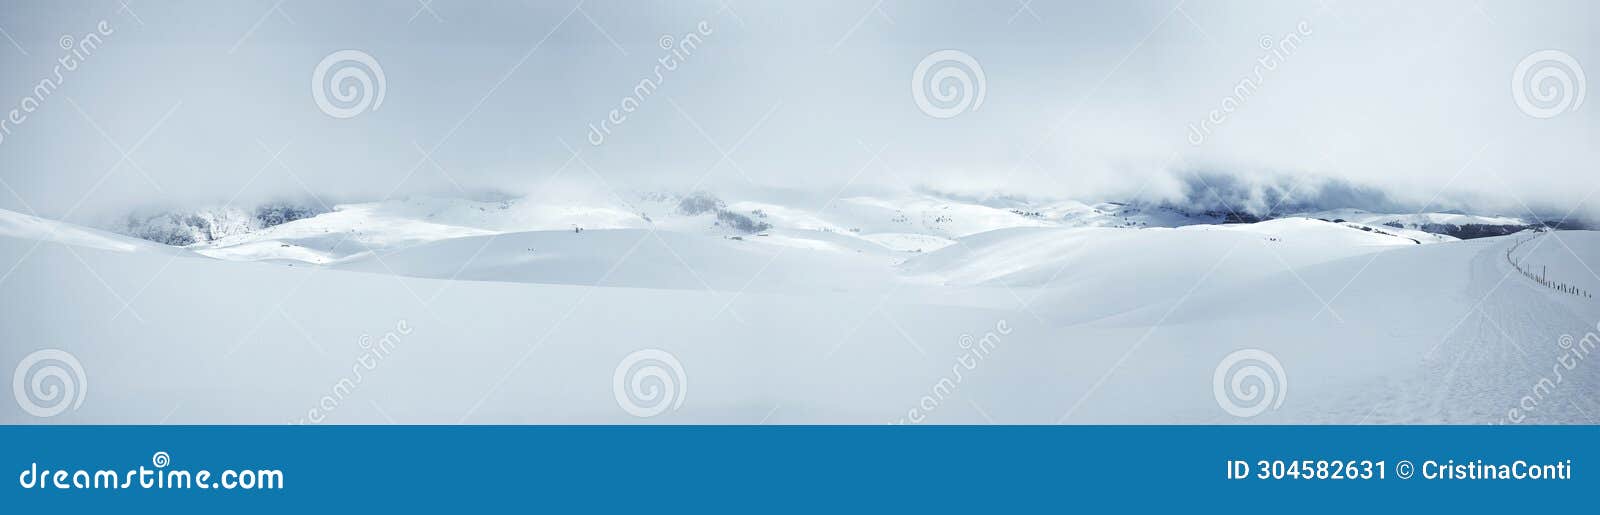 winter landscape of snow-capped mountains with a surreal blue-white atmosphere